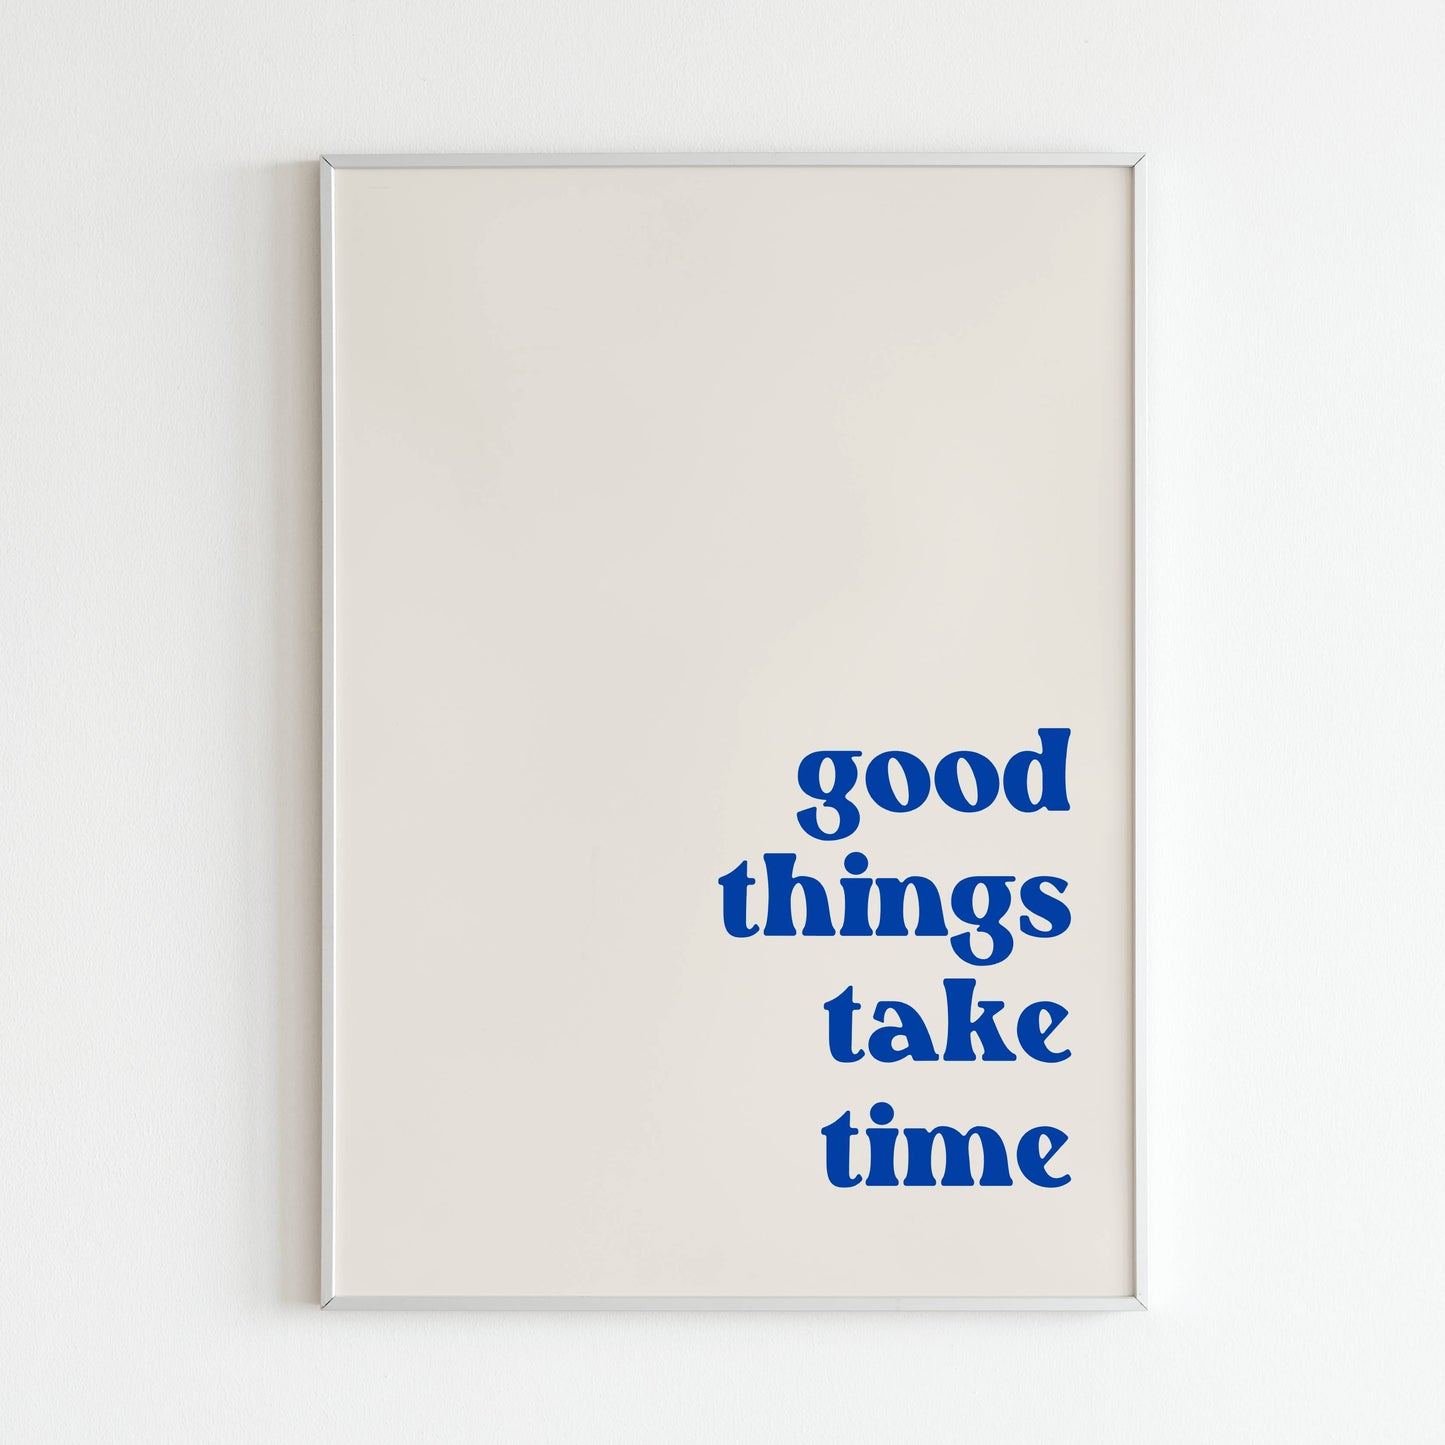 Good Things Take Time close-up of printable wall art poster. Focus on the calming colors and brushstrokes.